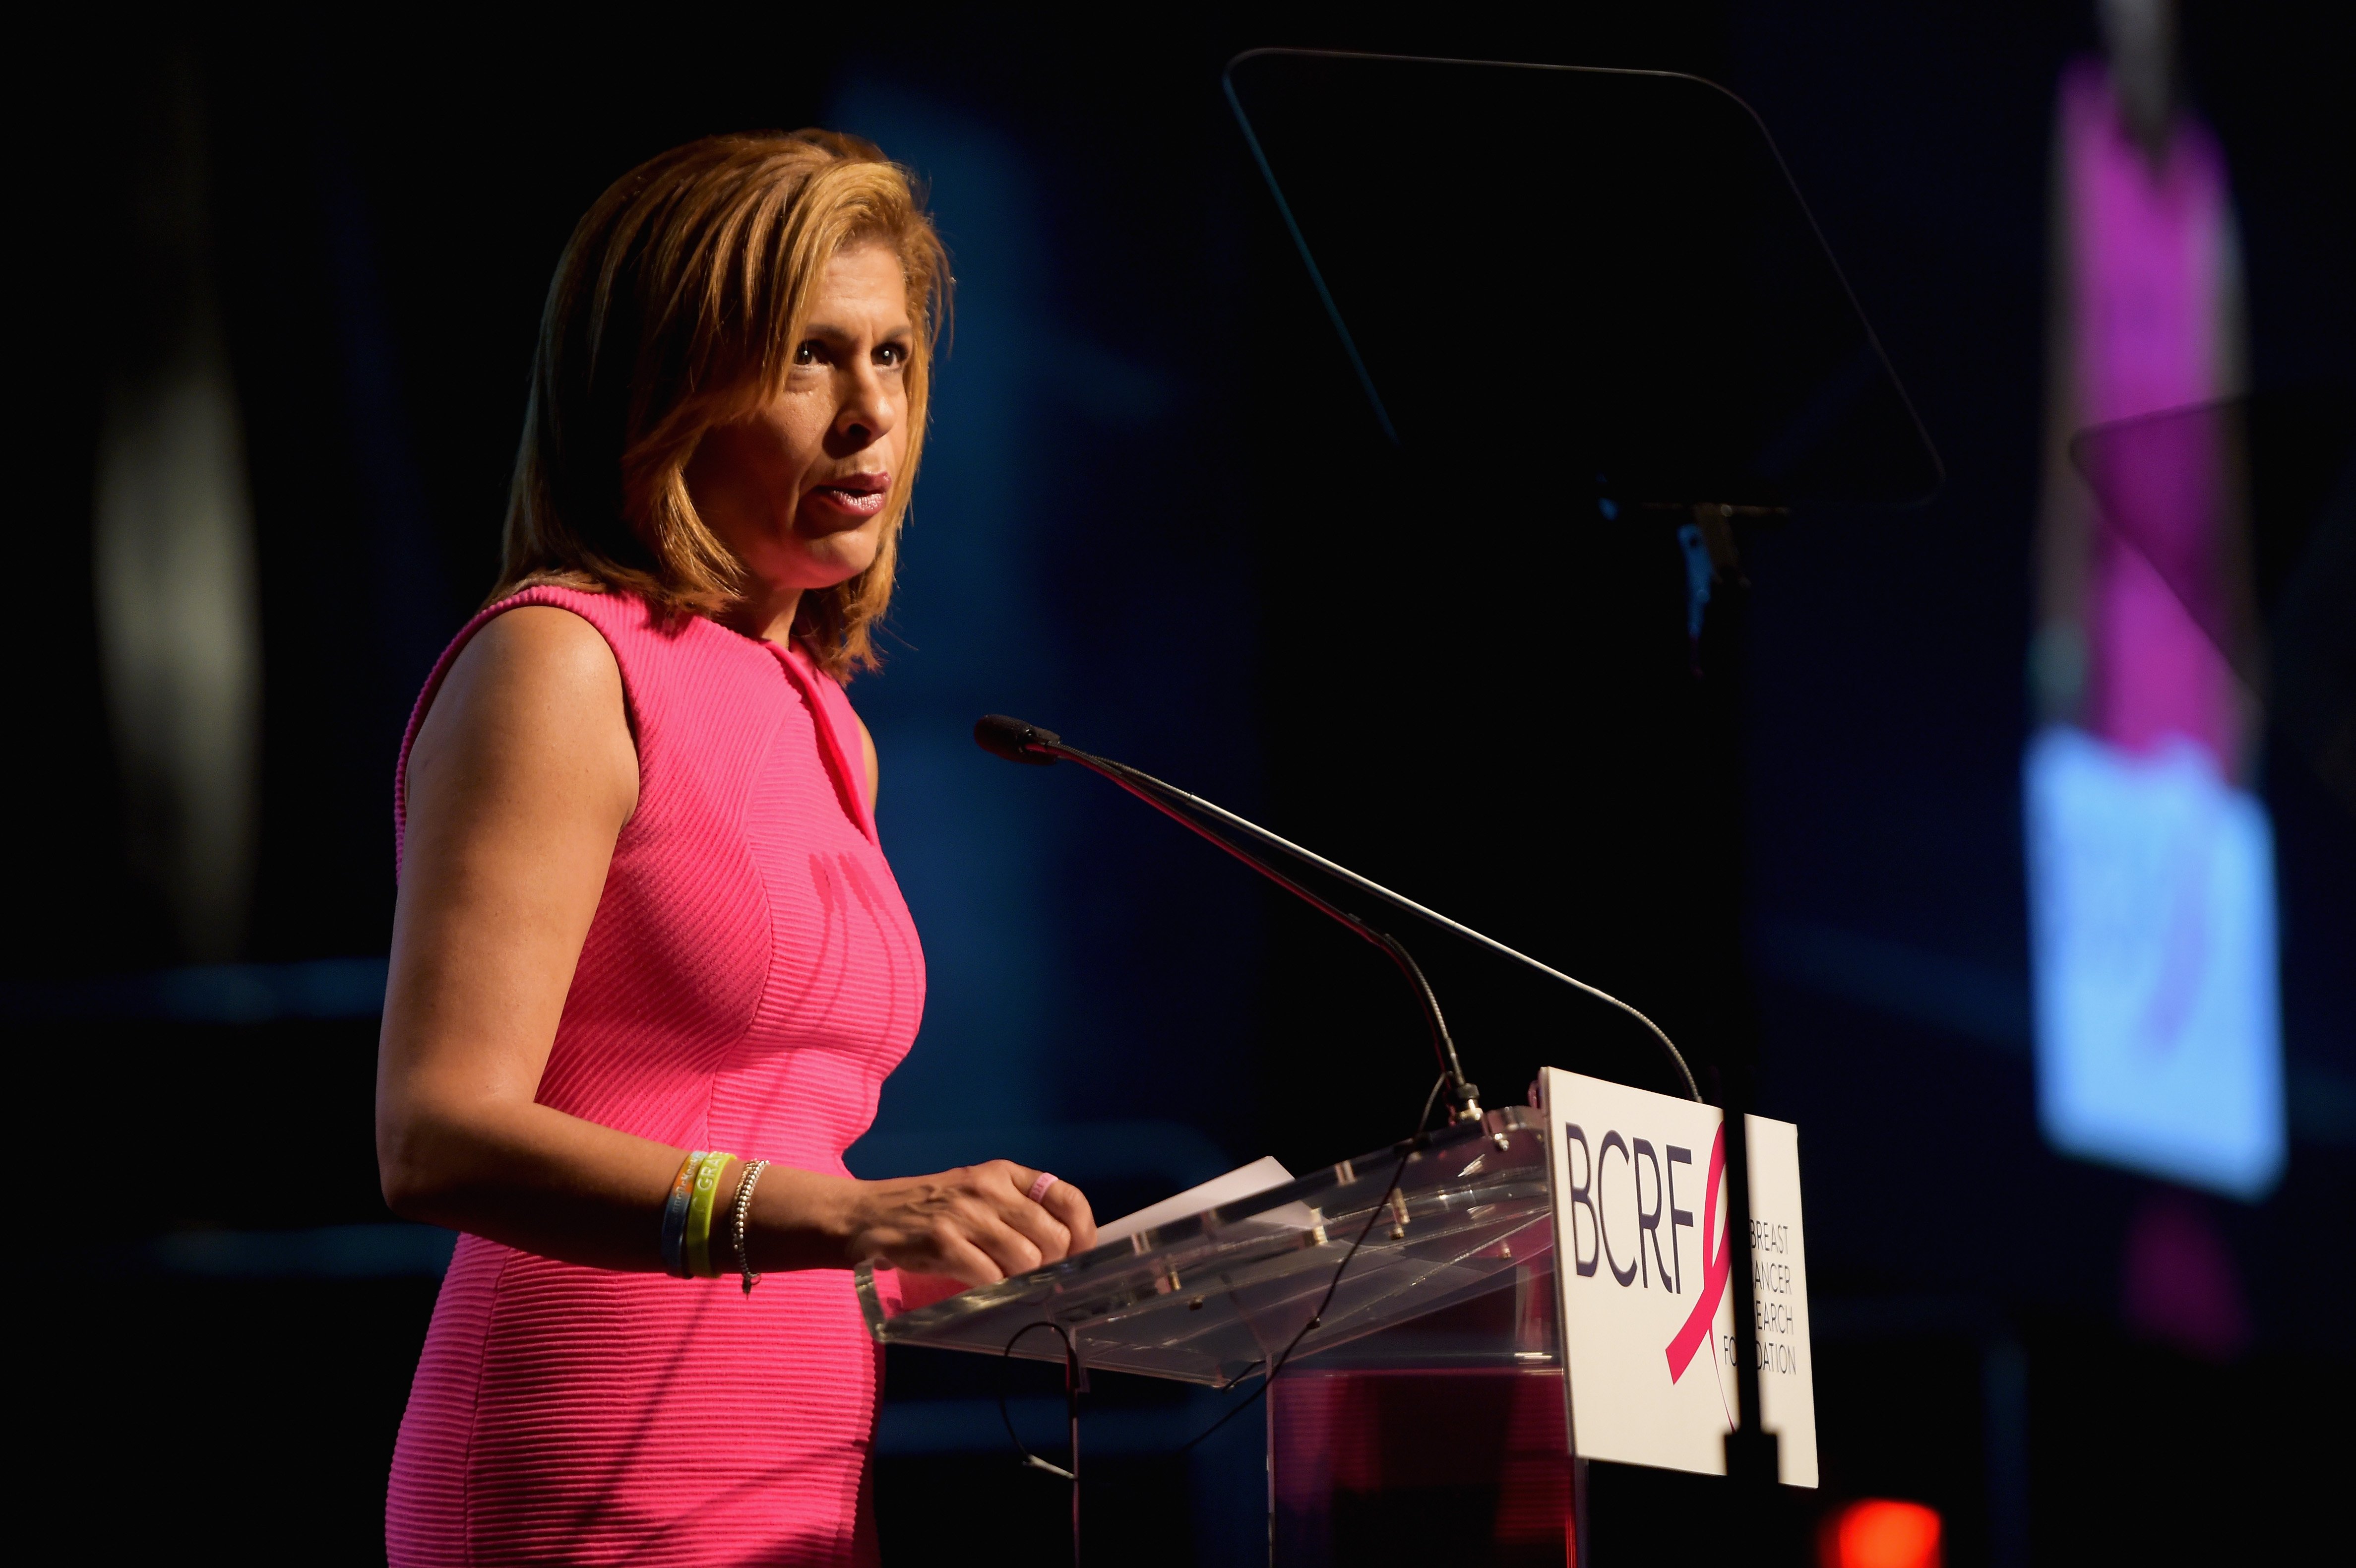 Hoda Kotb speaks onstage at the Breast Cancer Research Foundation New York Symposium and Awards Luncheon at New York Hilton on October 19, 2017 in New York City | Photo: Getty Images